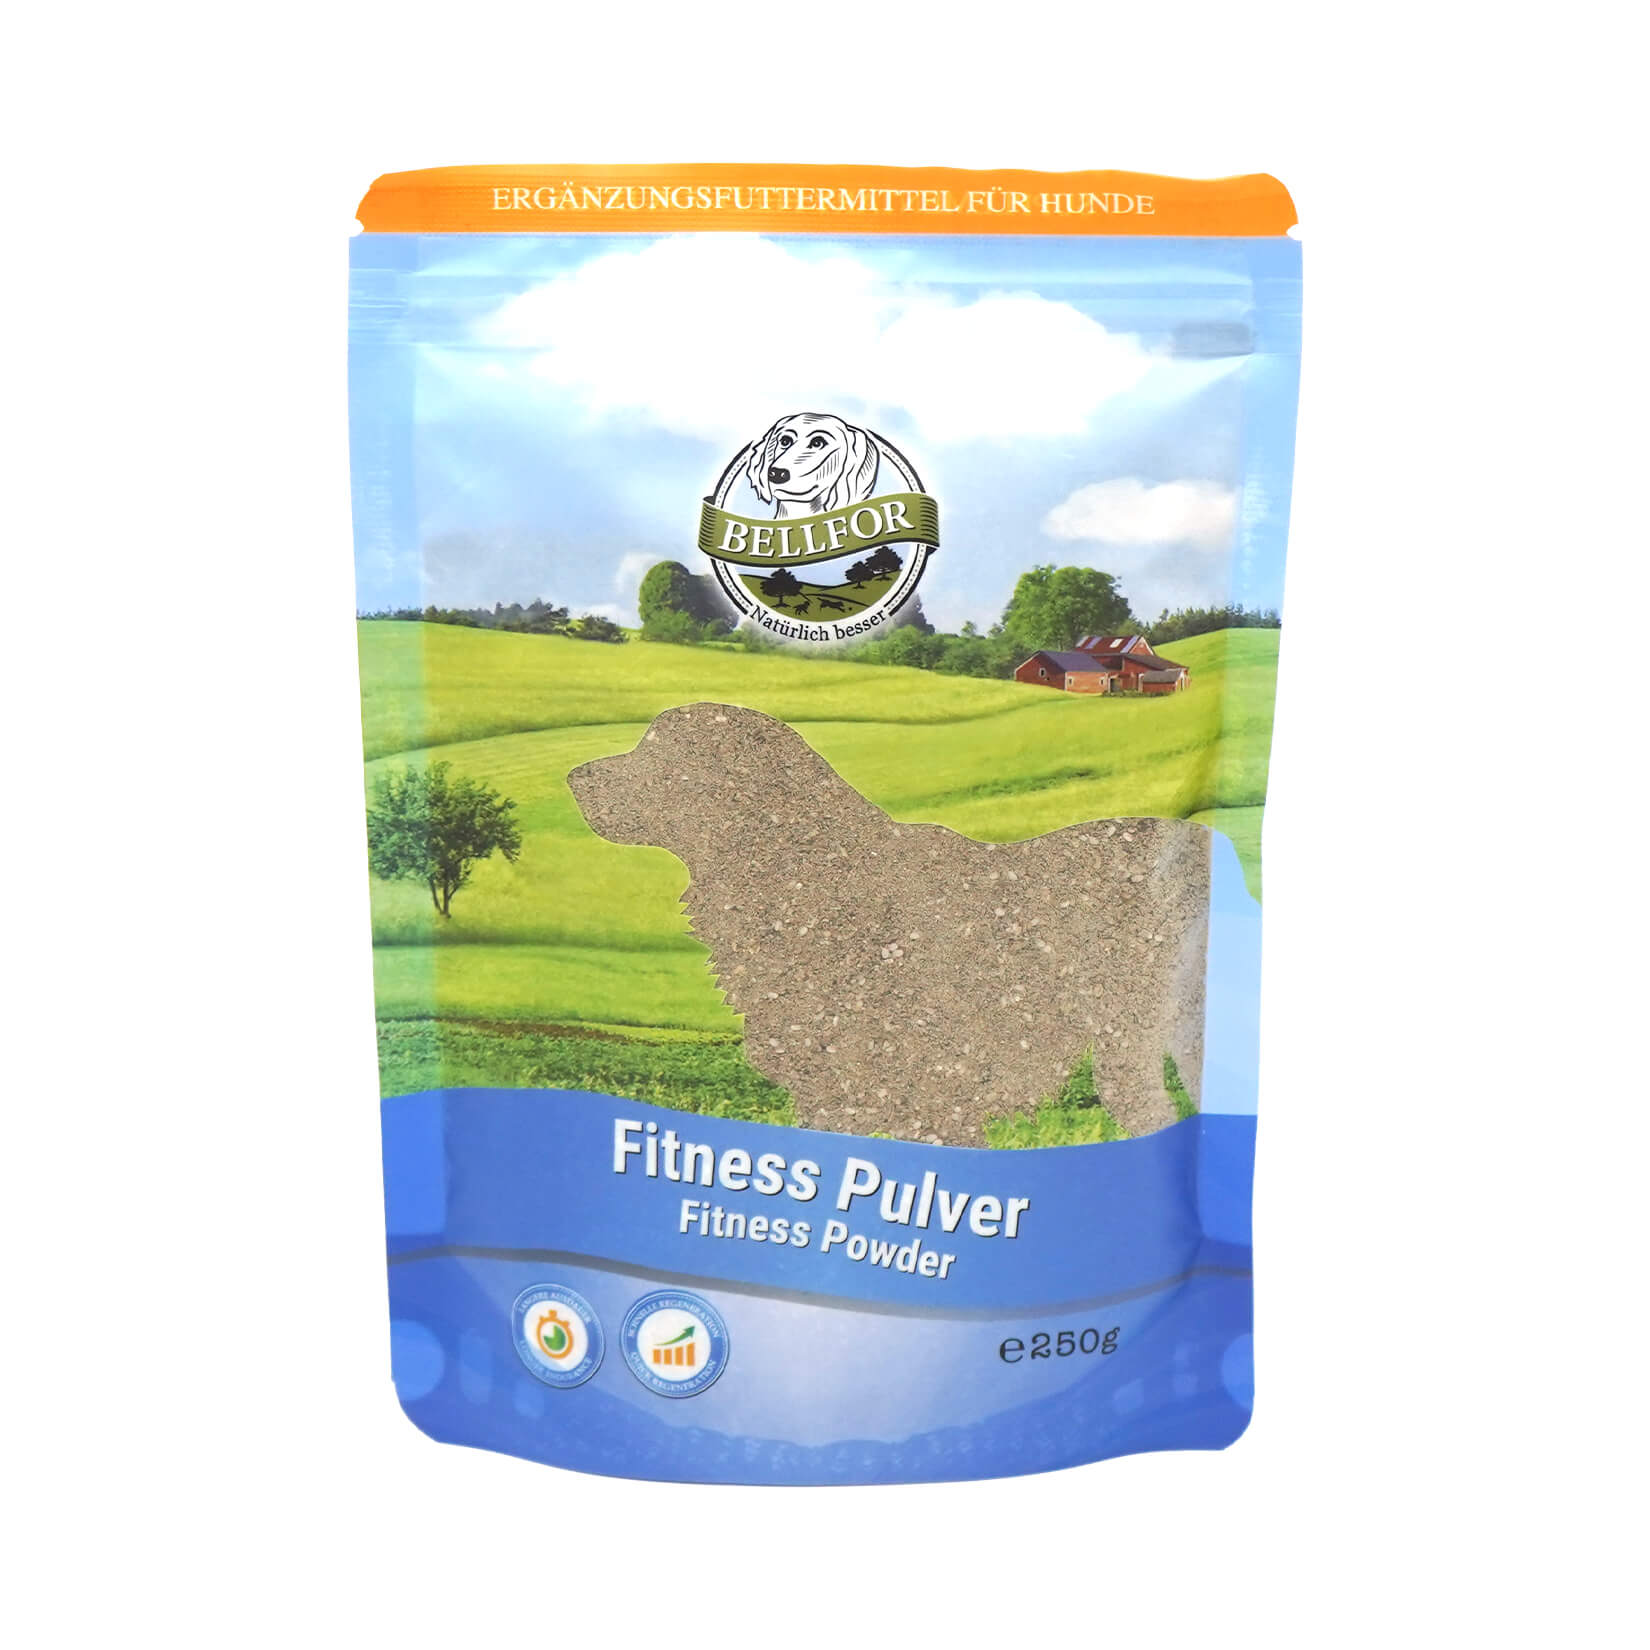 Fitness poudre pour chiens sportifs - fitness pulver - 250g